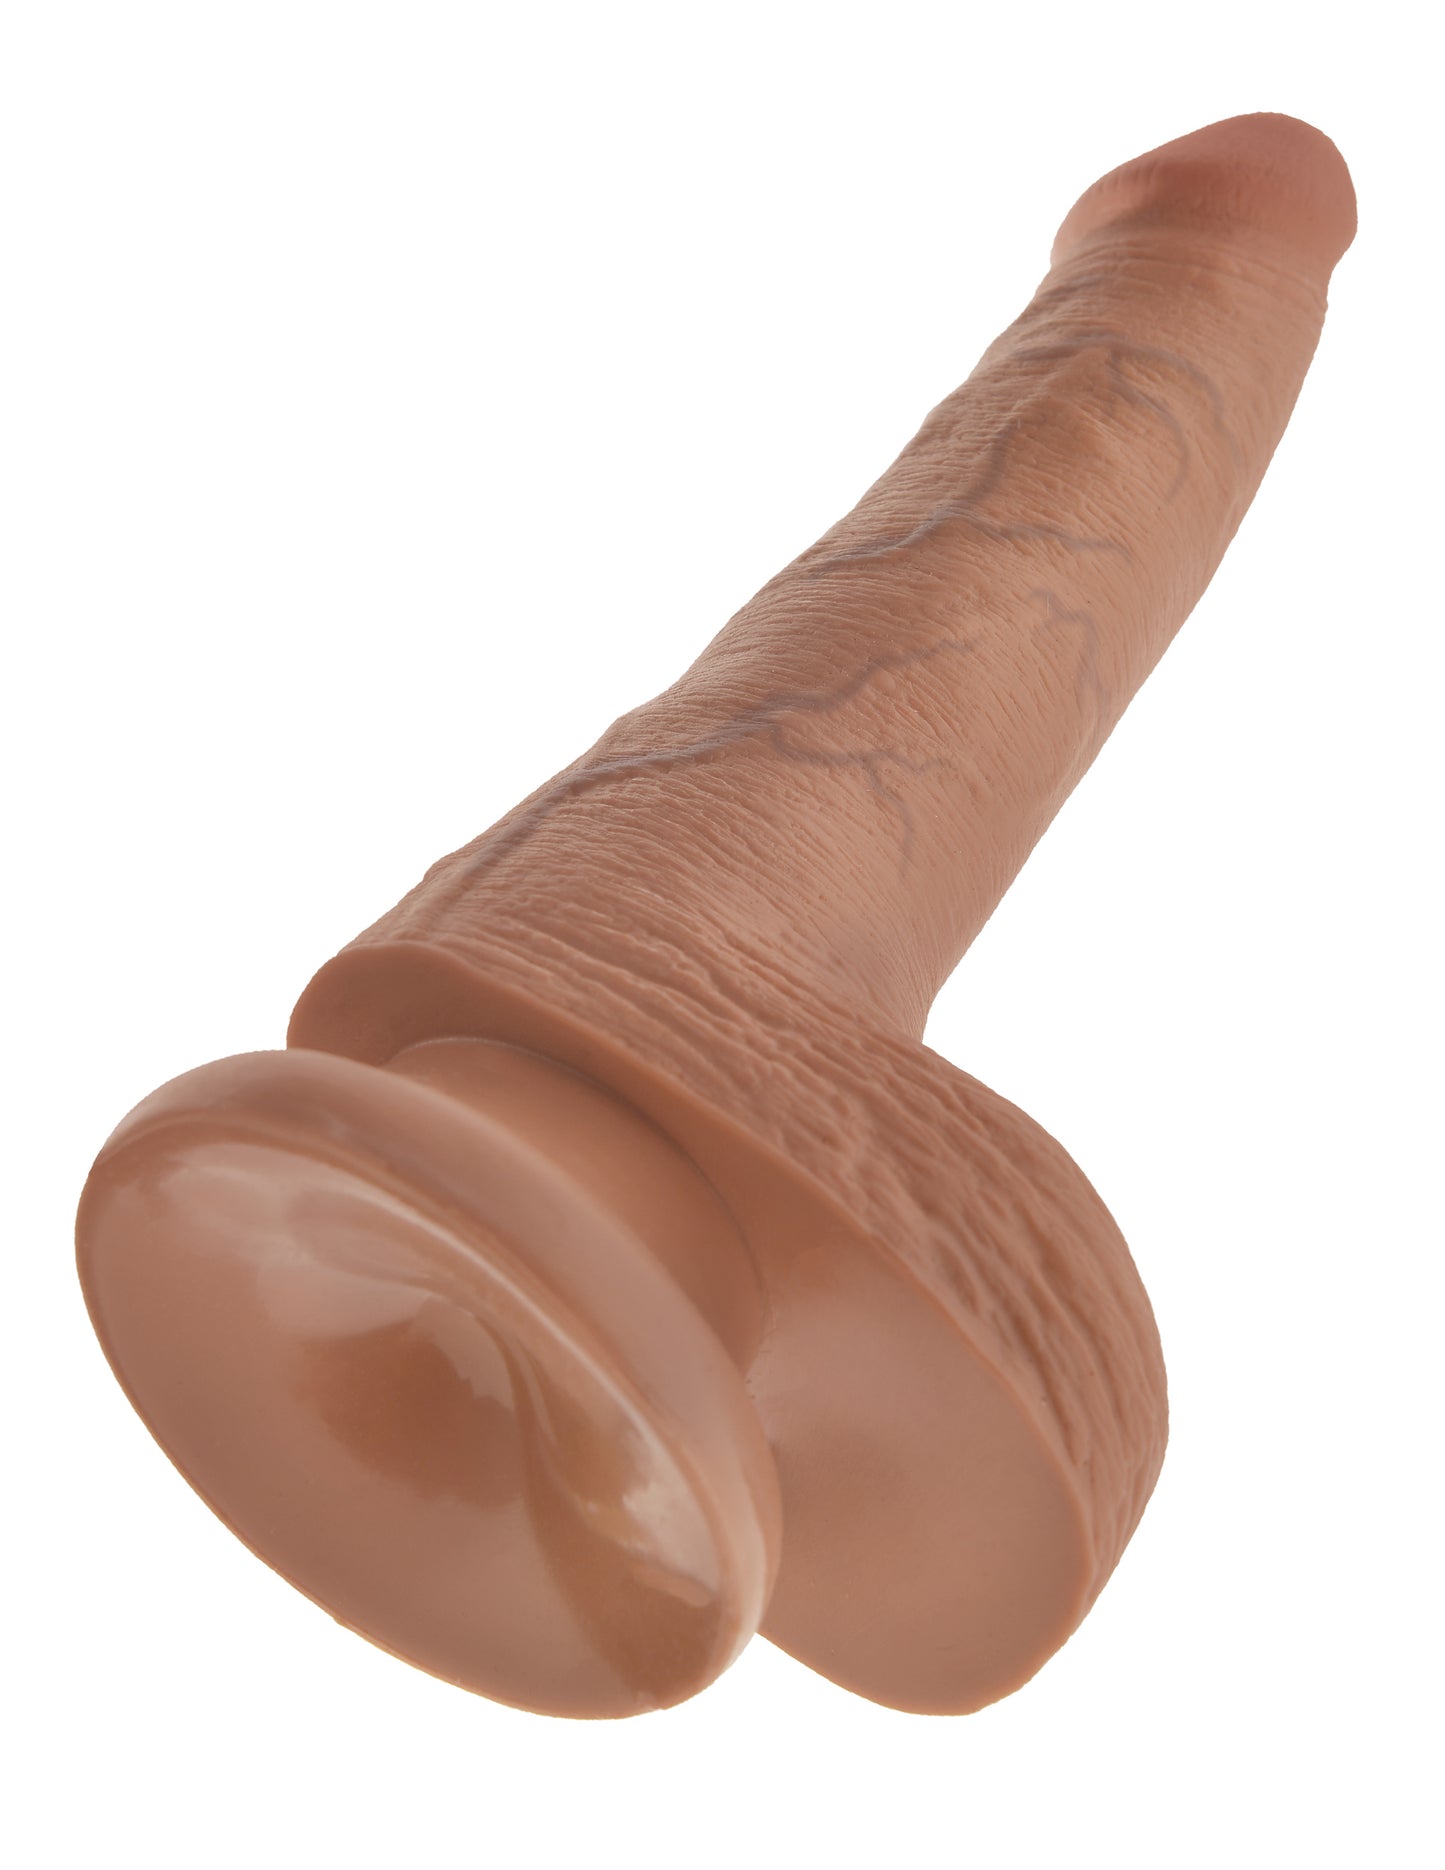 King Cock - 6 inch with balls - Caramel